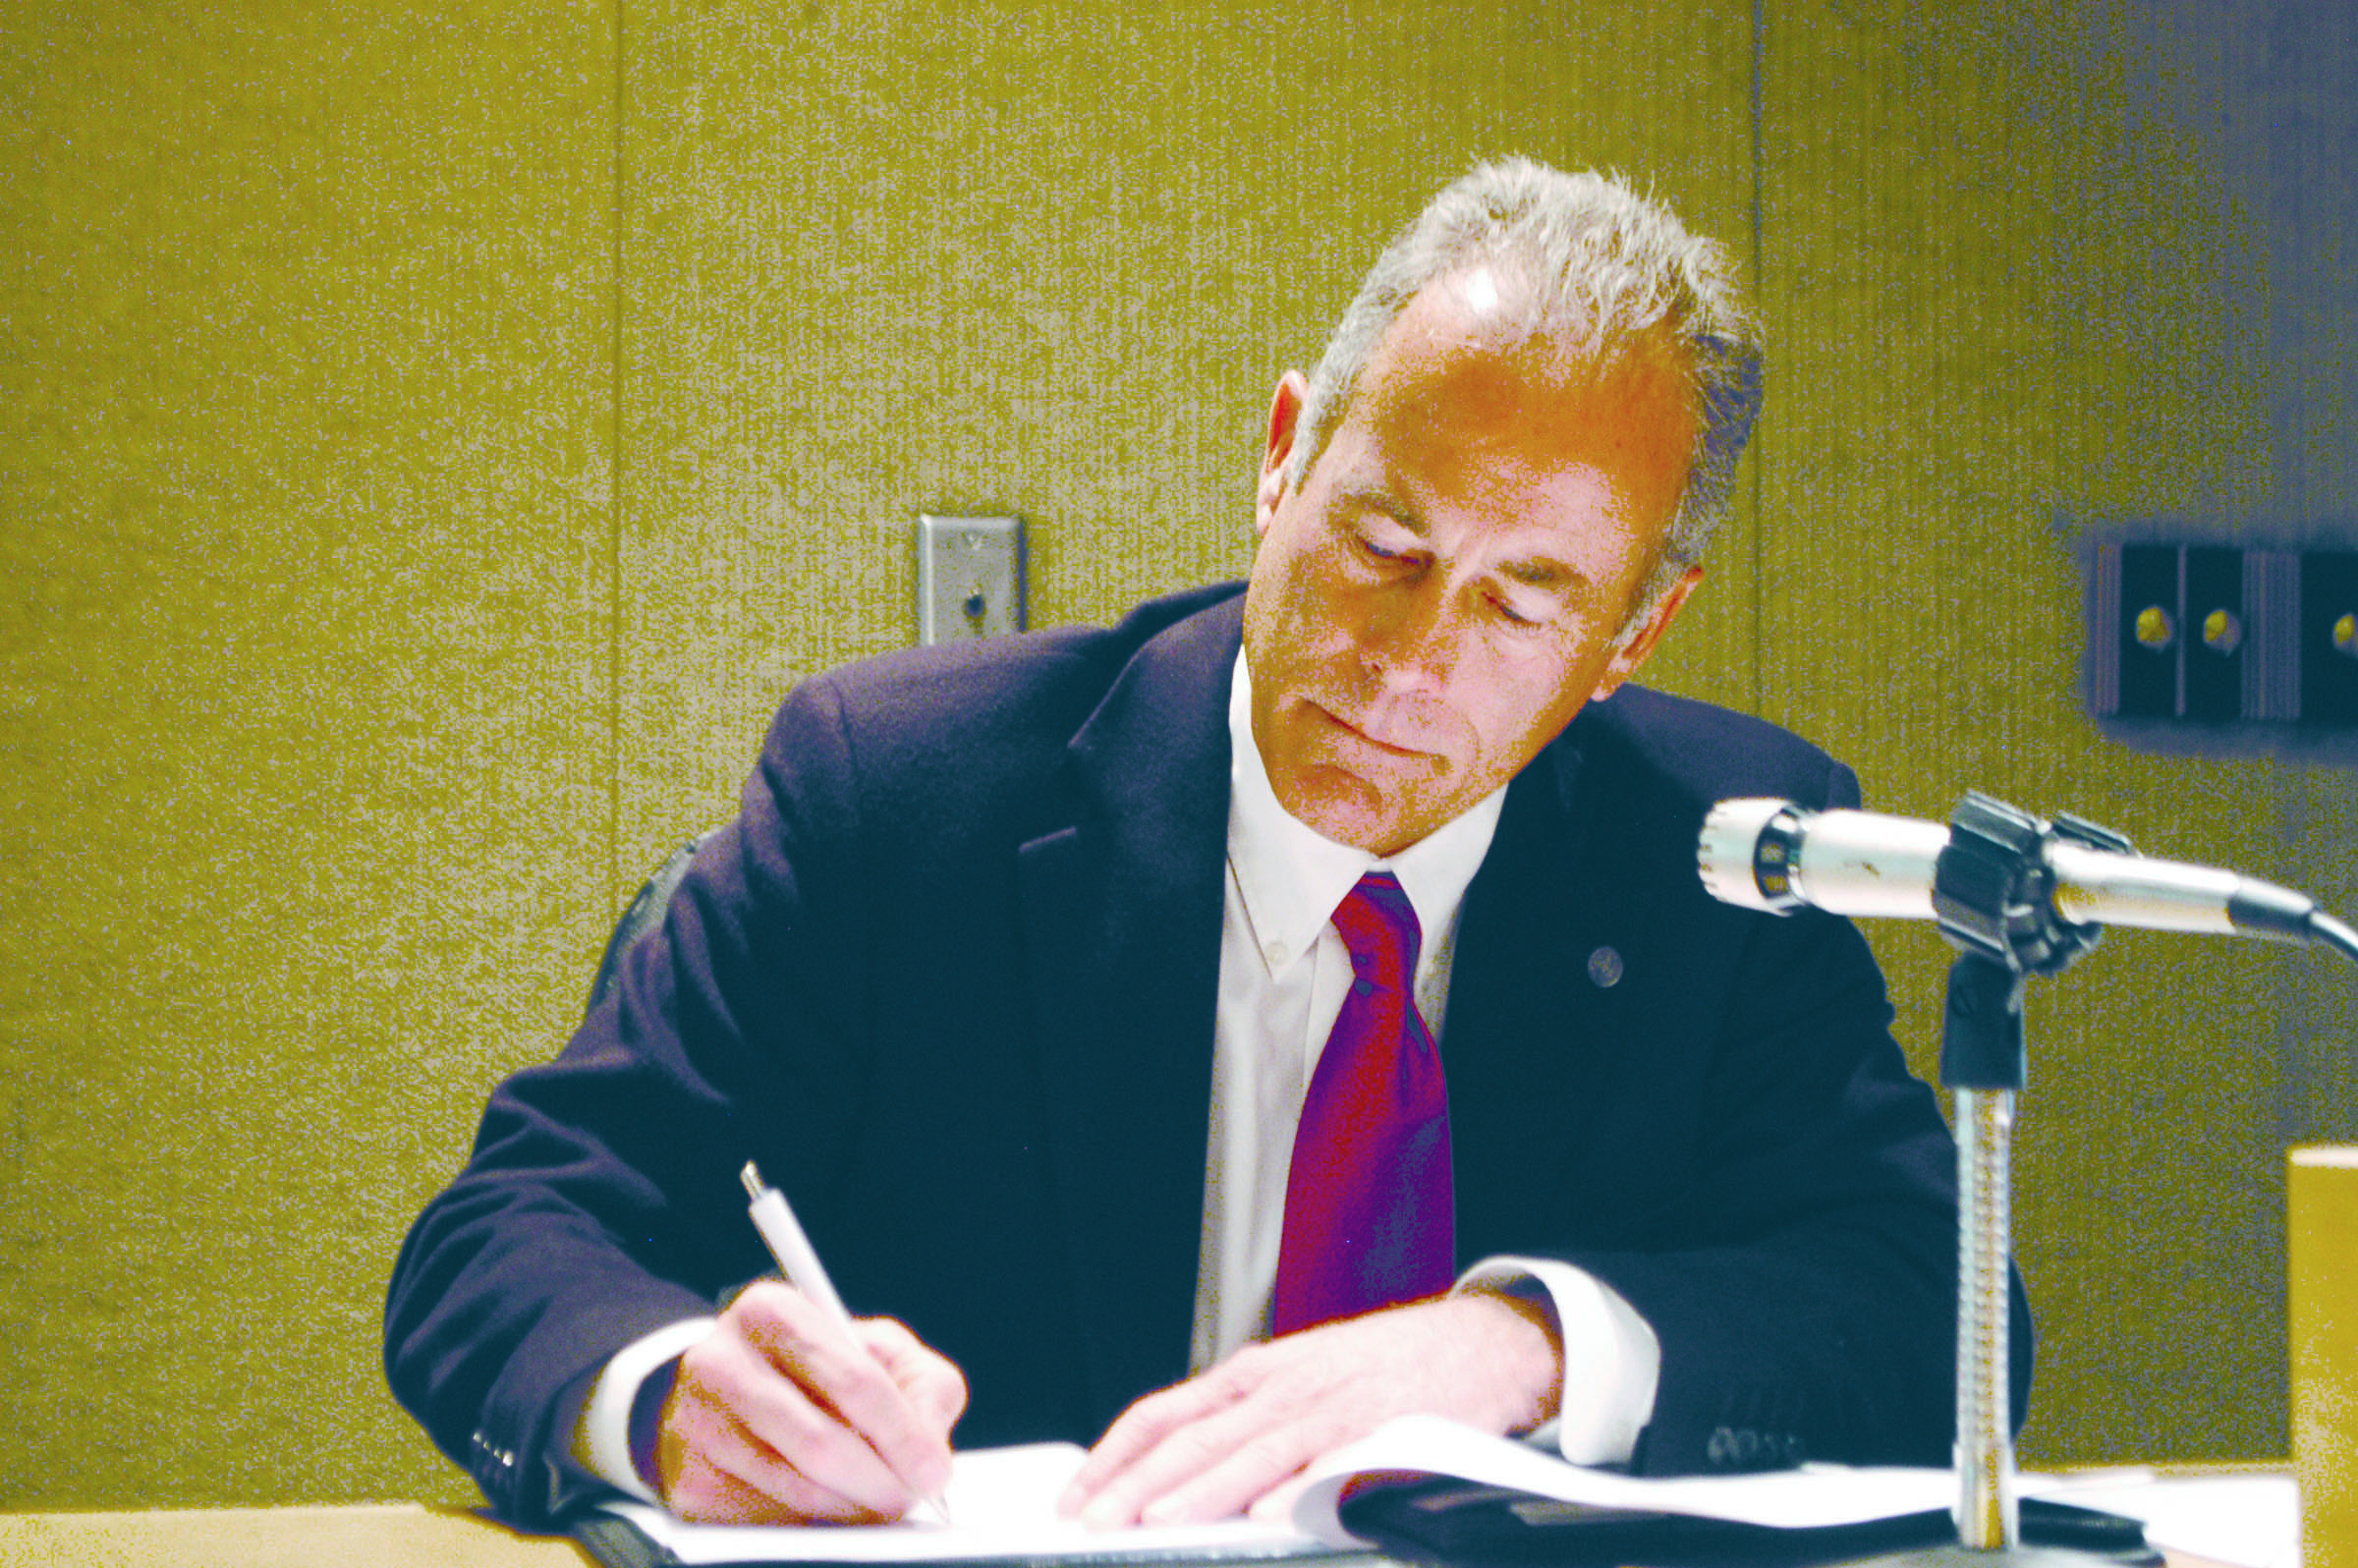 Jeff Robb signs a contract with the Port of Port Angeles on Monday